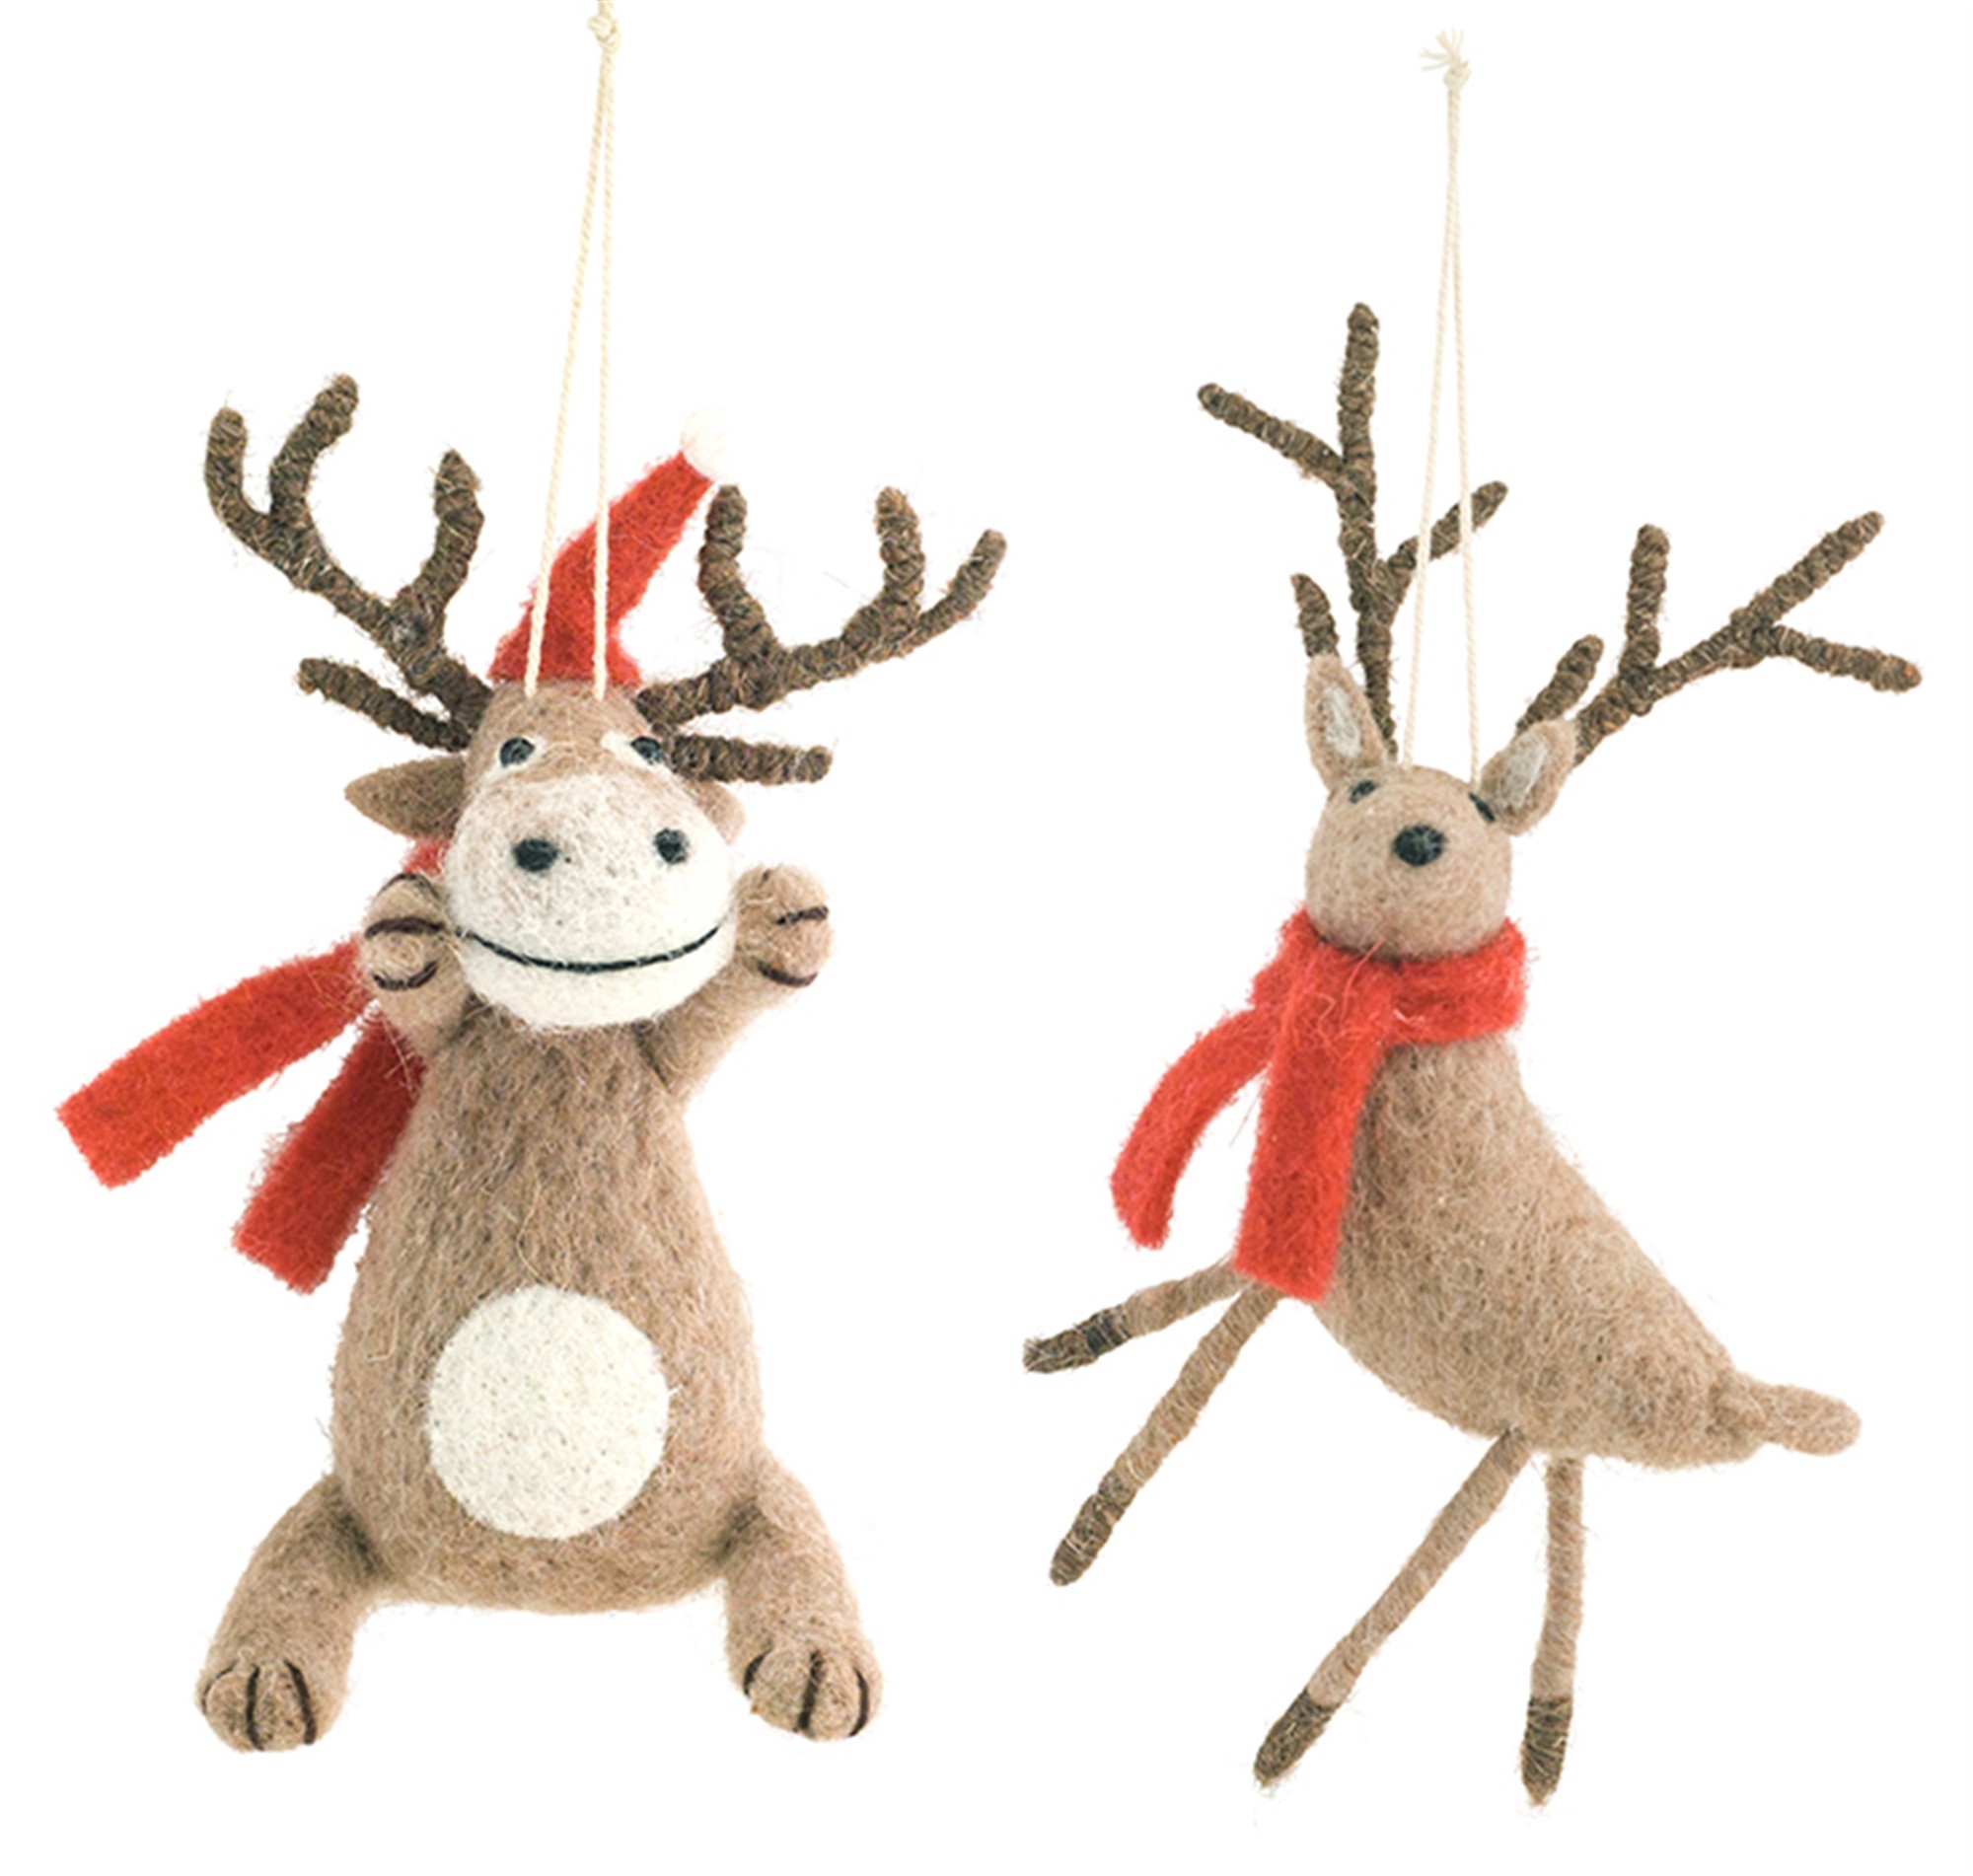 Animal Ornament (Set of 12) 7"H, 7.5"H Felted Wool